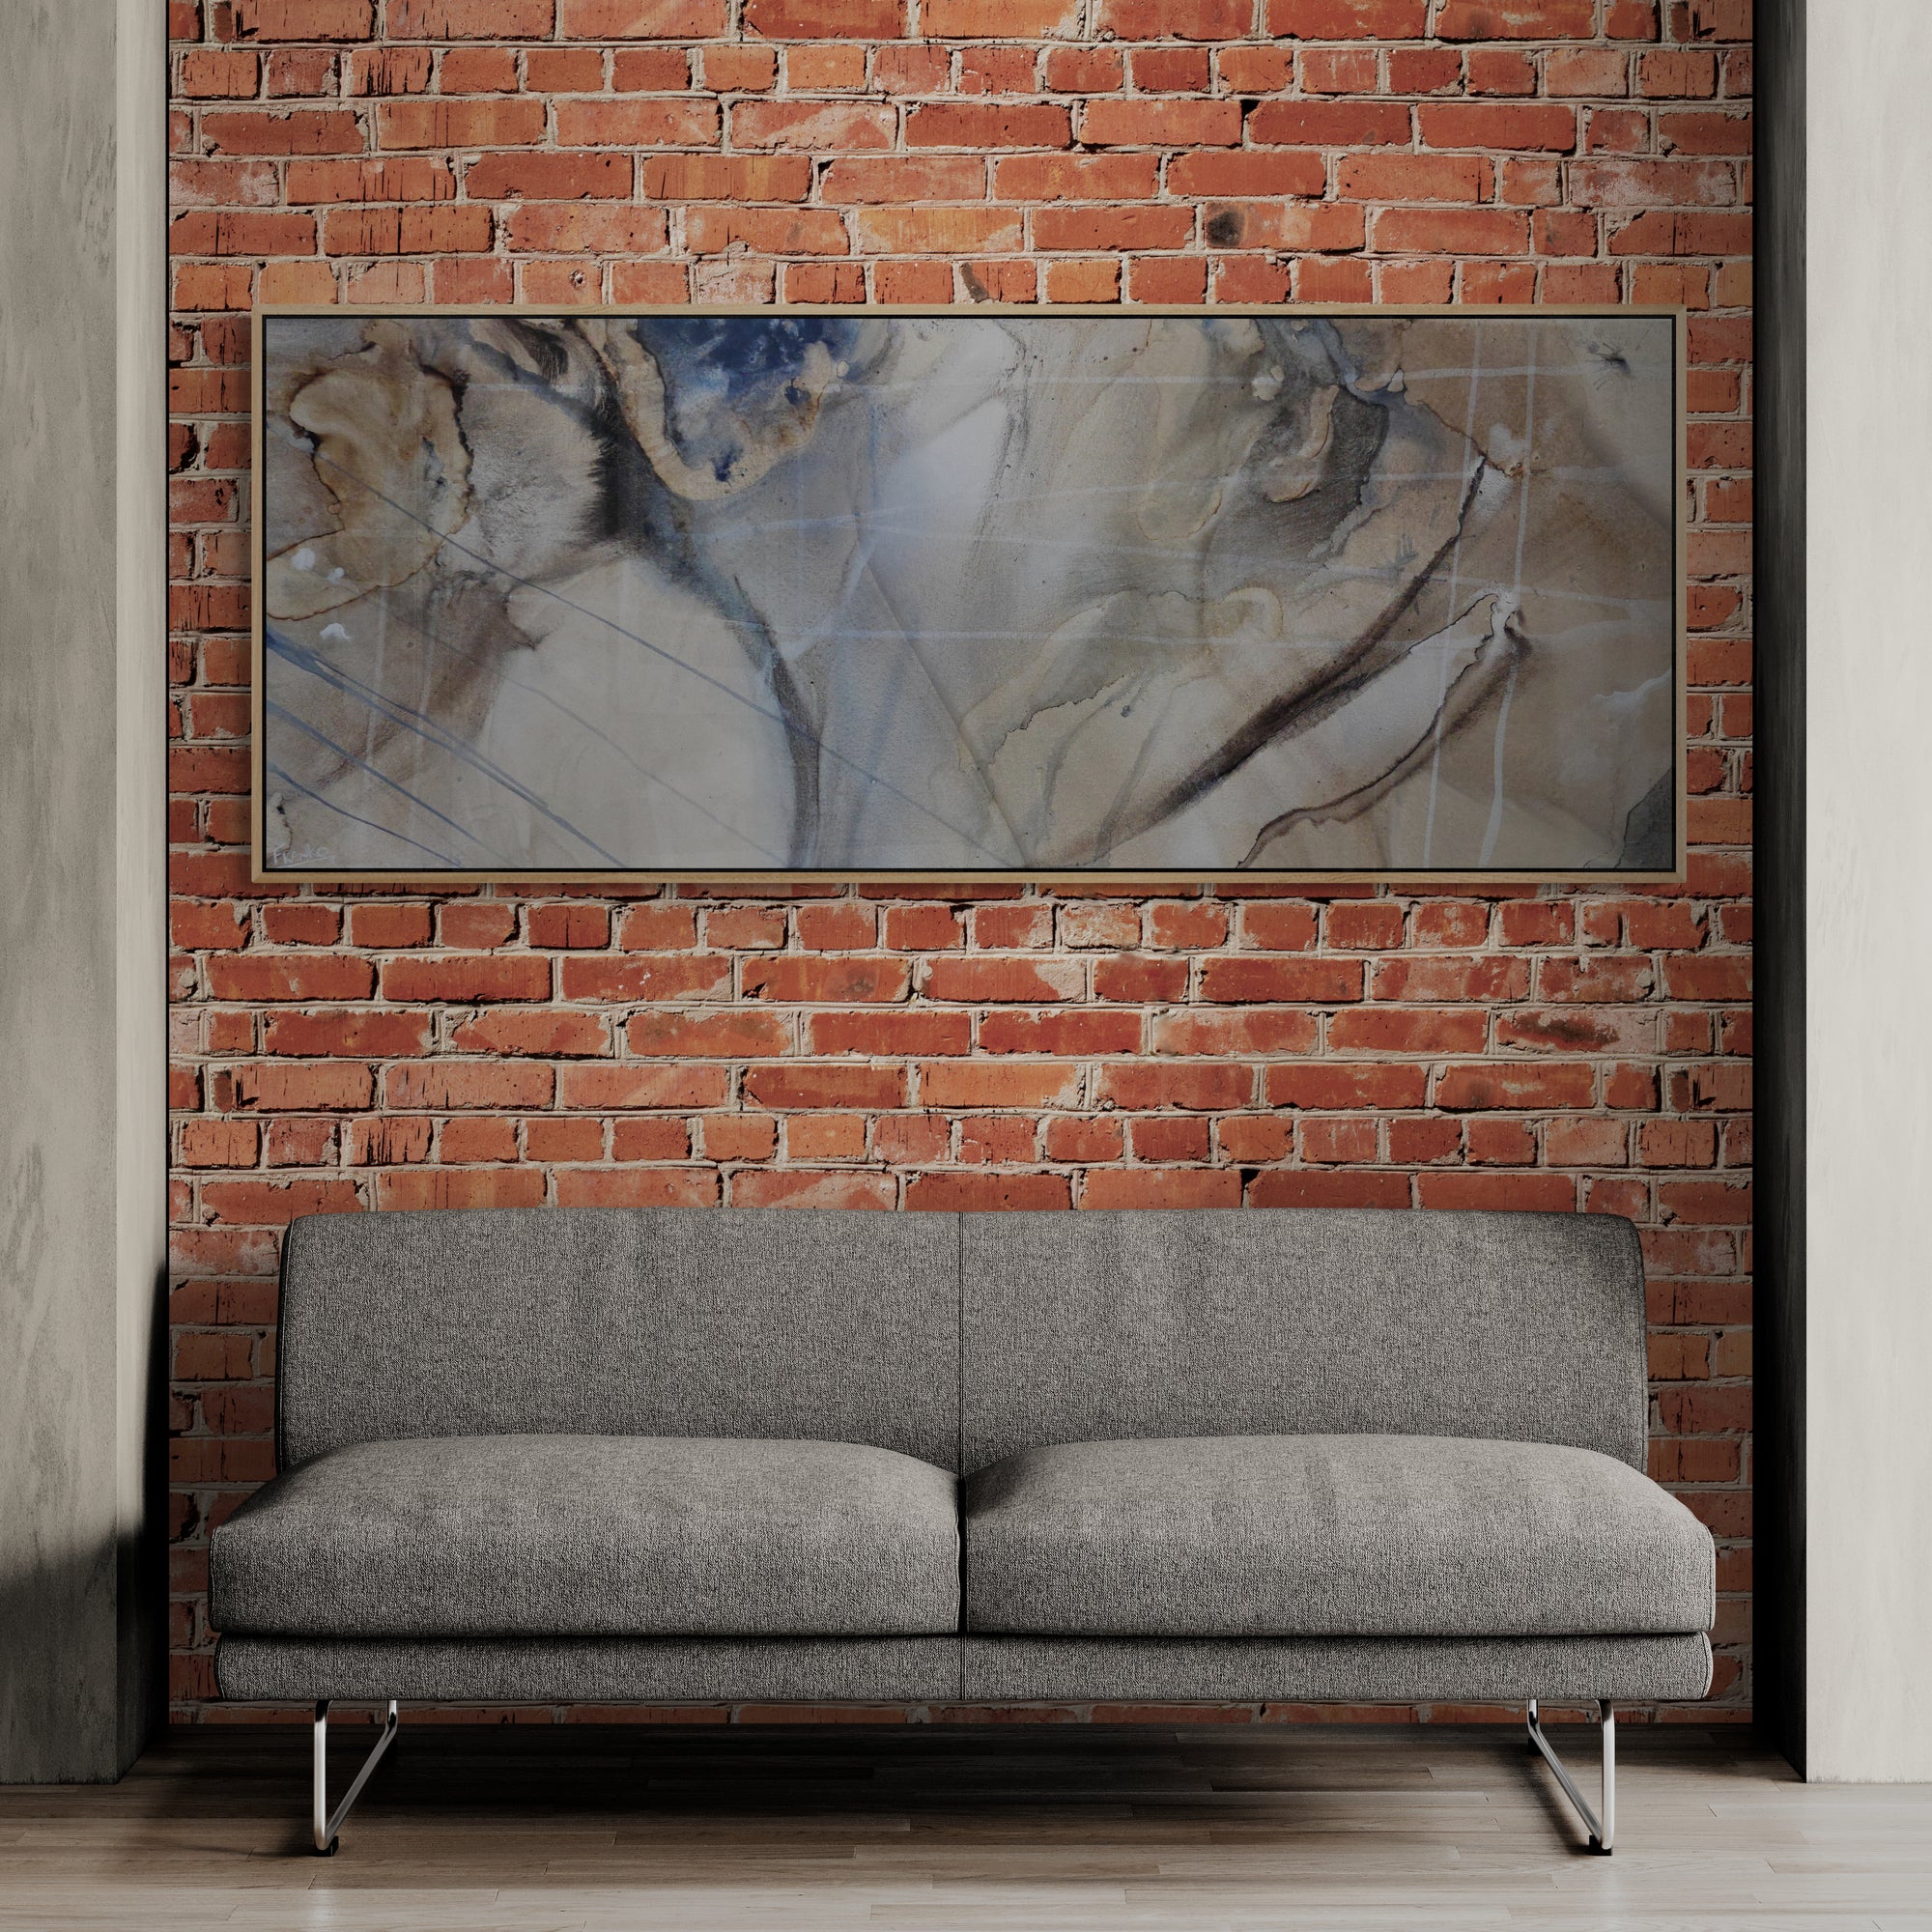 Refined 69 200cm x 80cm Cream Blue Rust White Grey Blended Abstract Painting Oak Frame